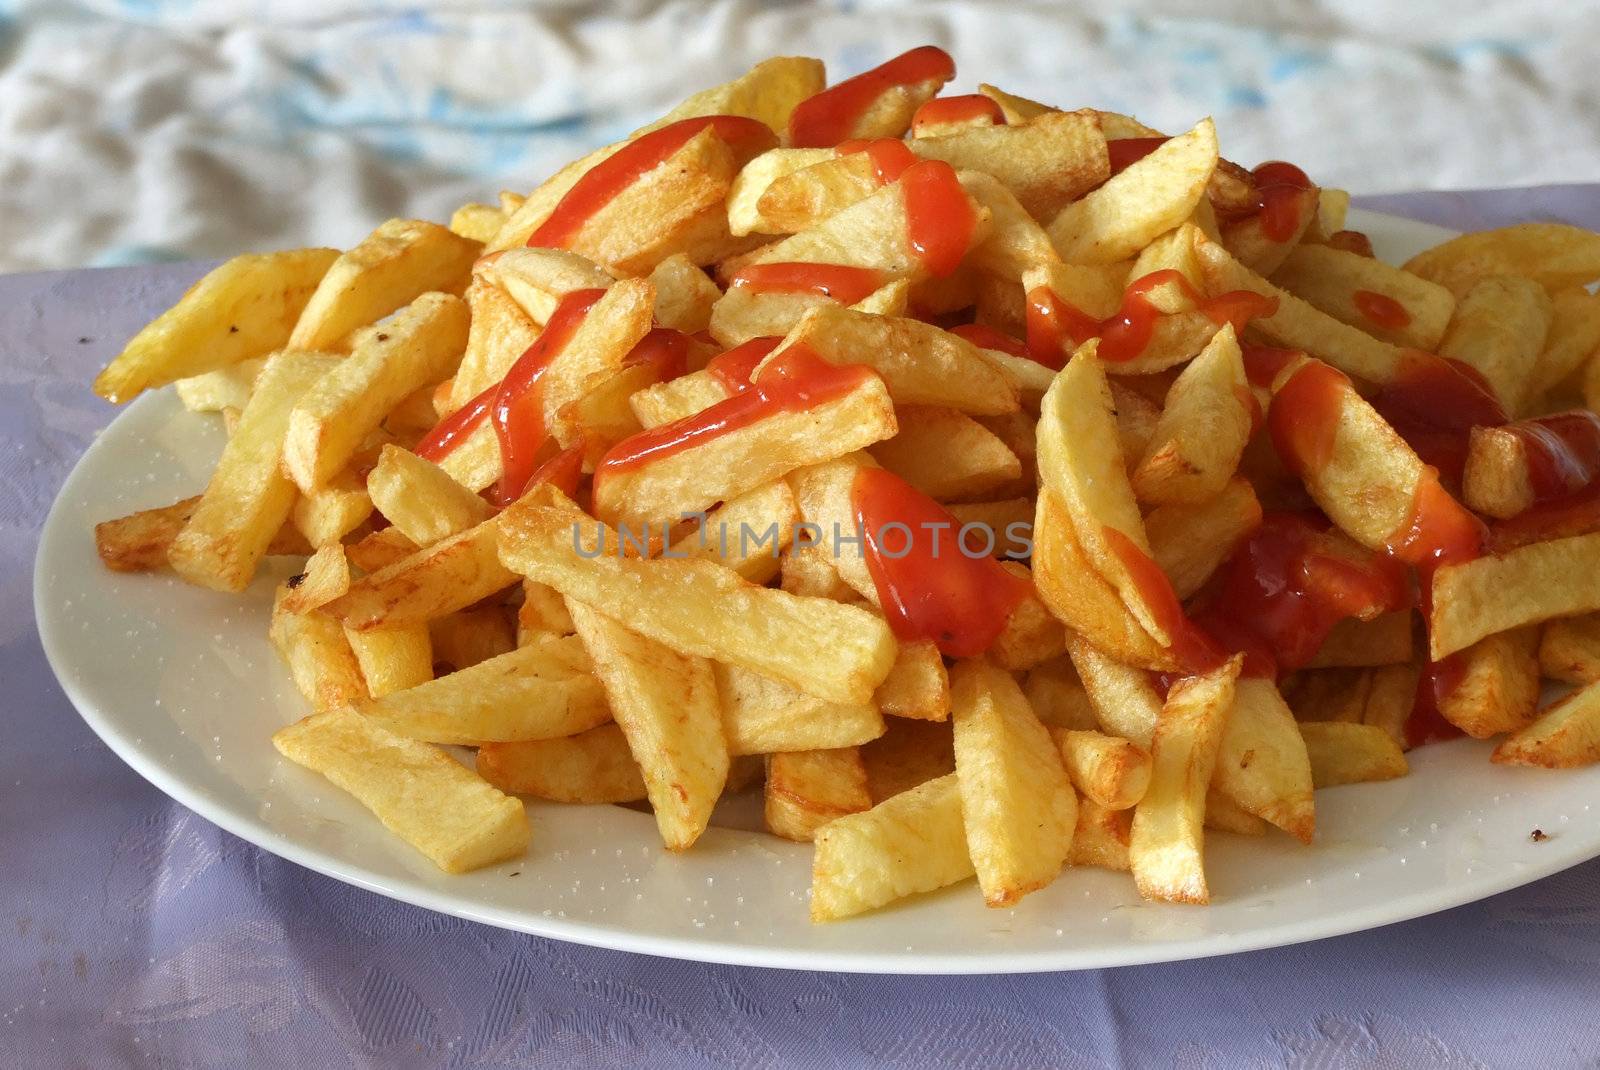 franch frites on a plate, 